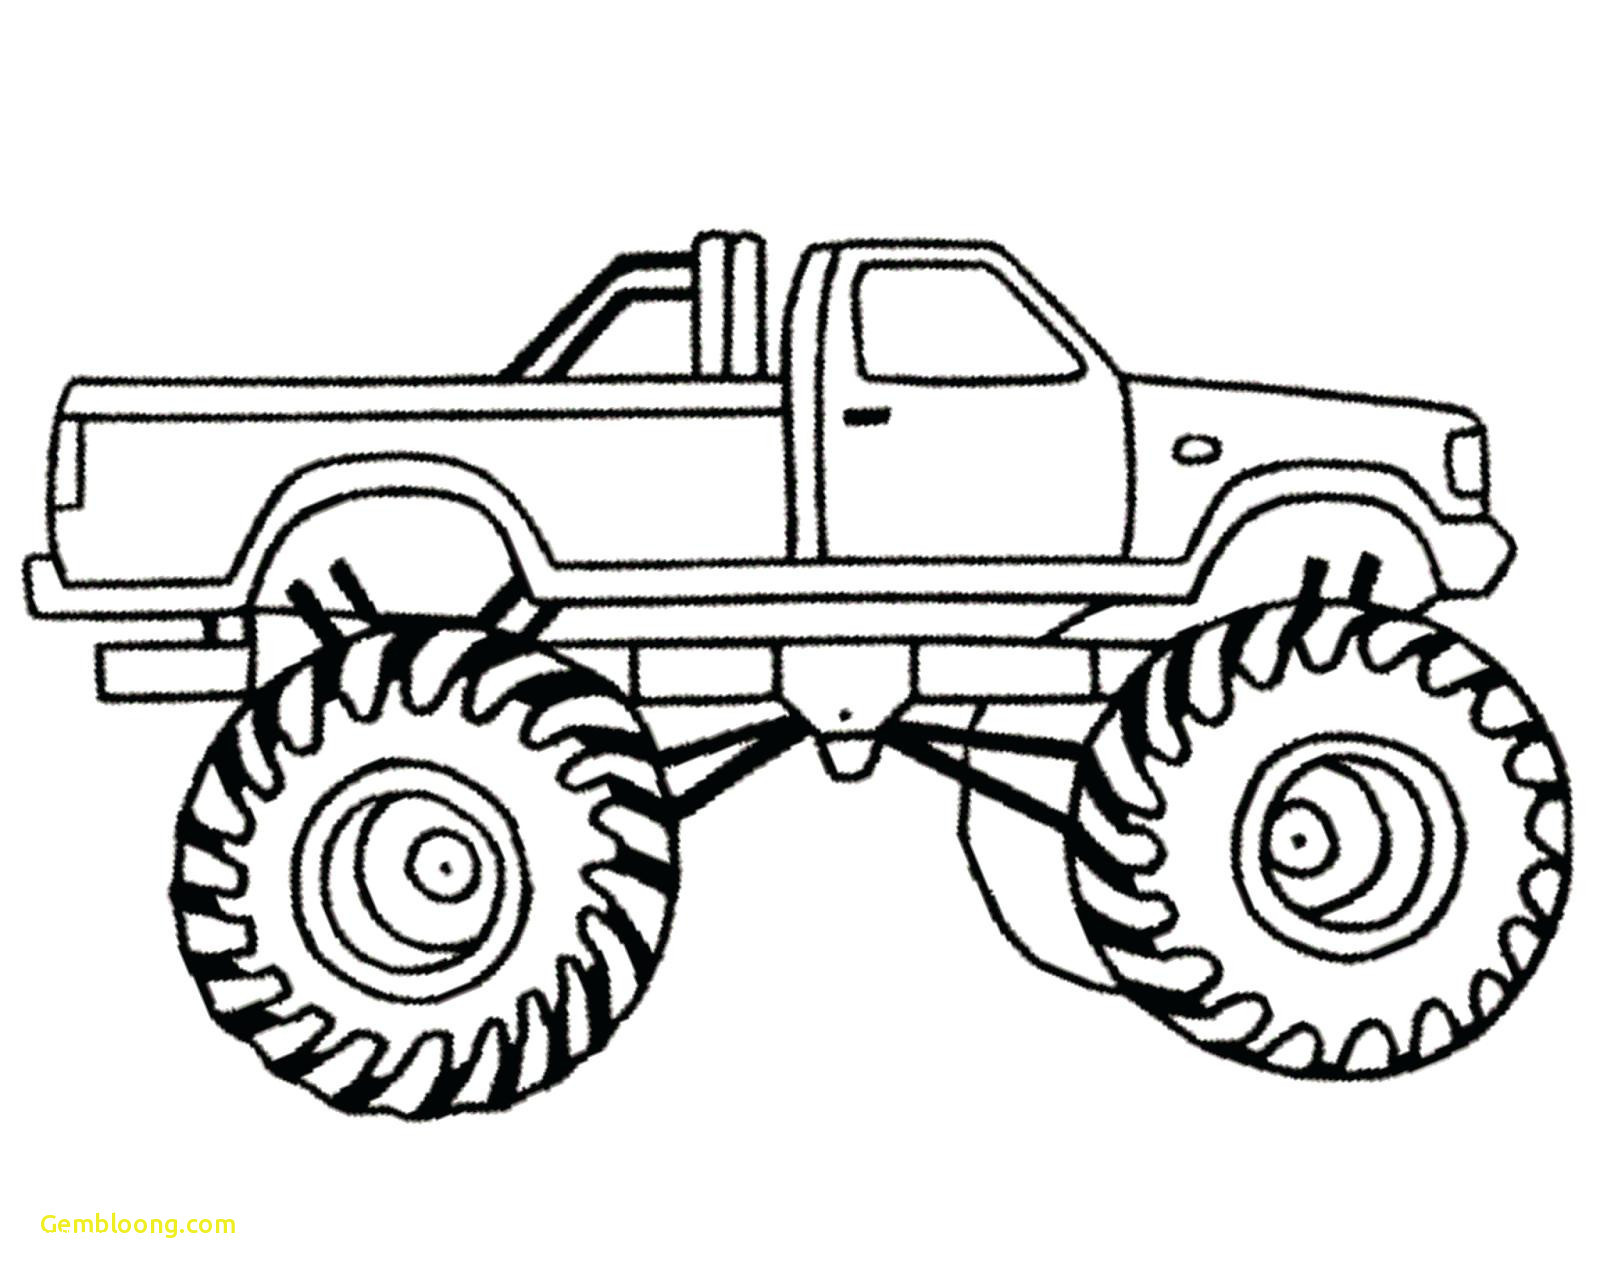 Fabulous Truck Coloring Pages Photo Inspirations – Neighborhood